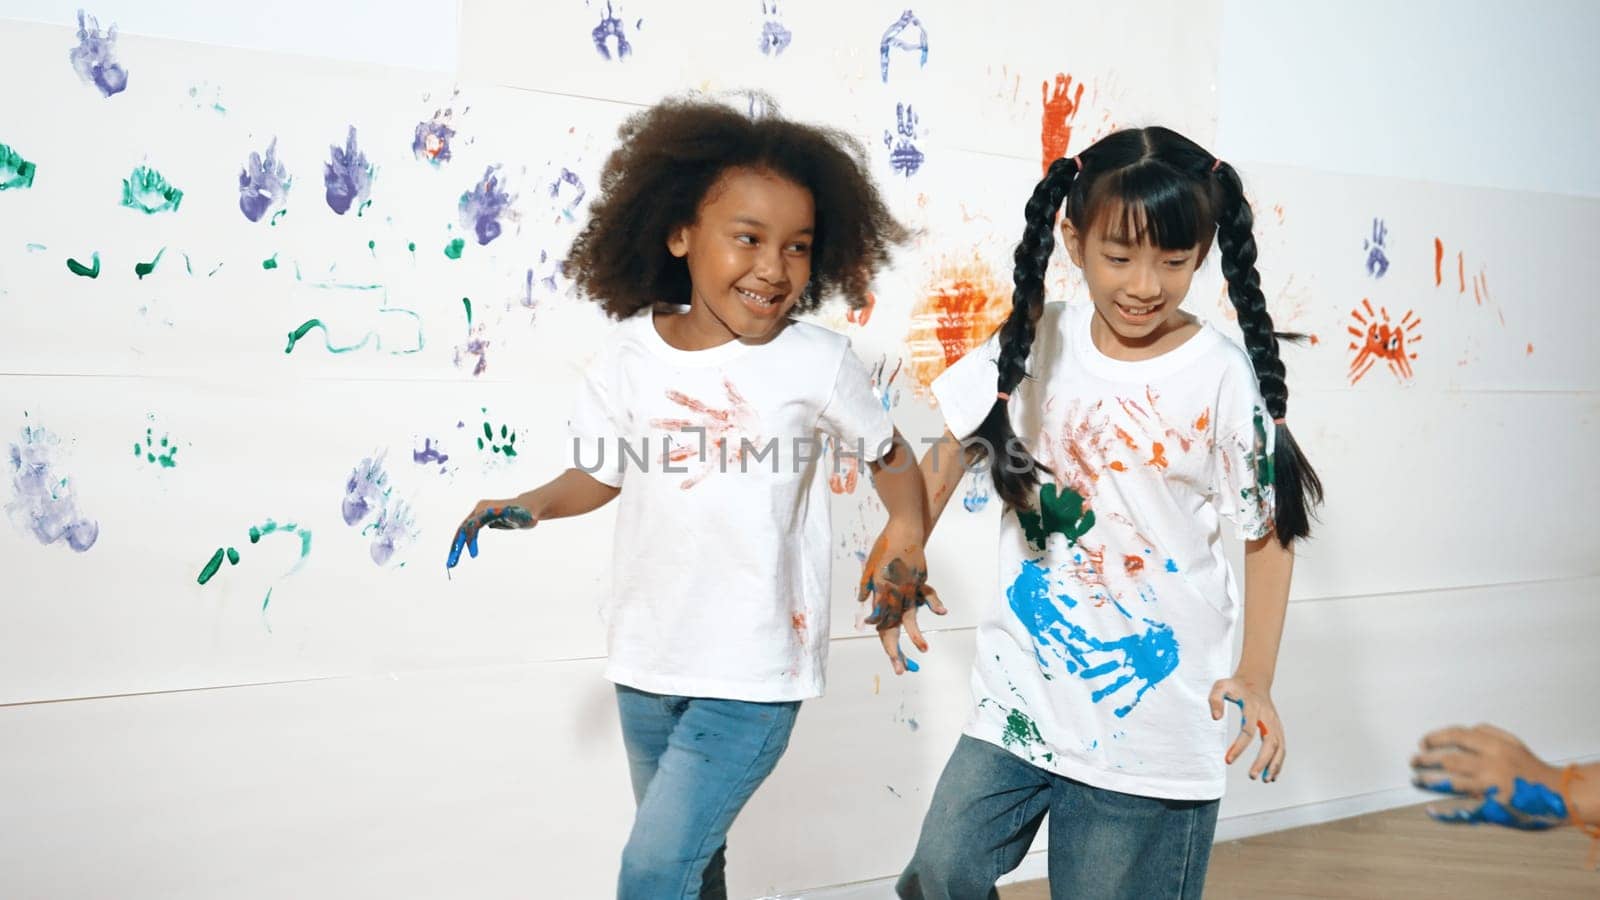 Playful children playing and running with colorful stained hand in front of white background. Funny happy multicultural students enjoy attending in art lesson. Creative activity concept. Erudition.